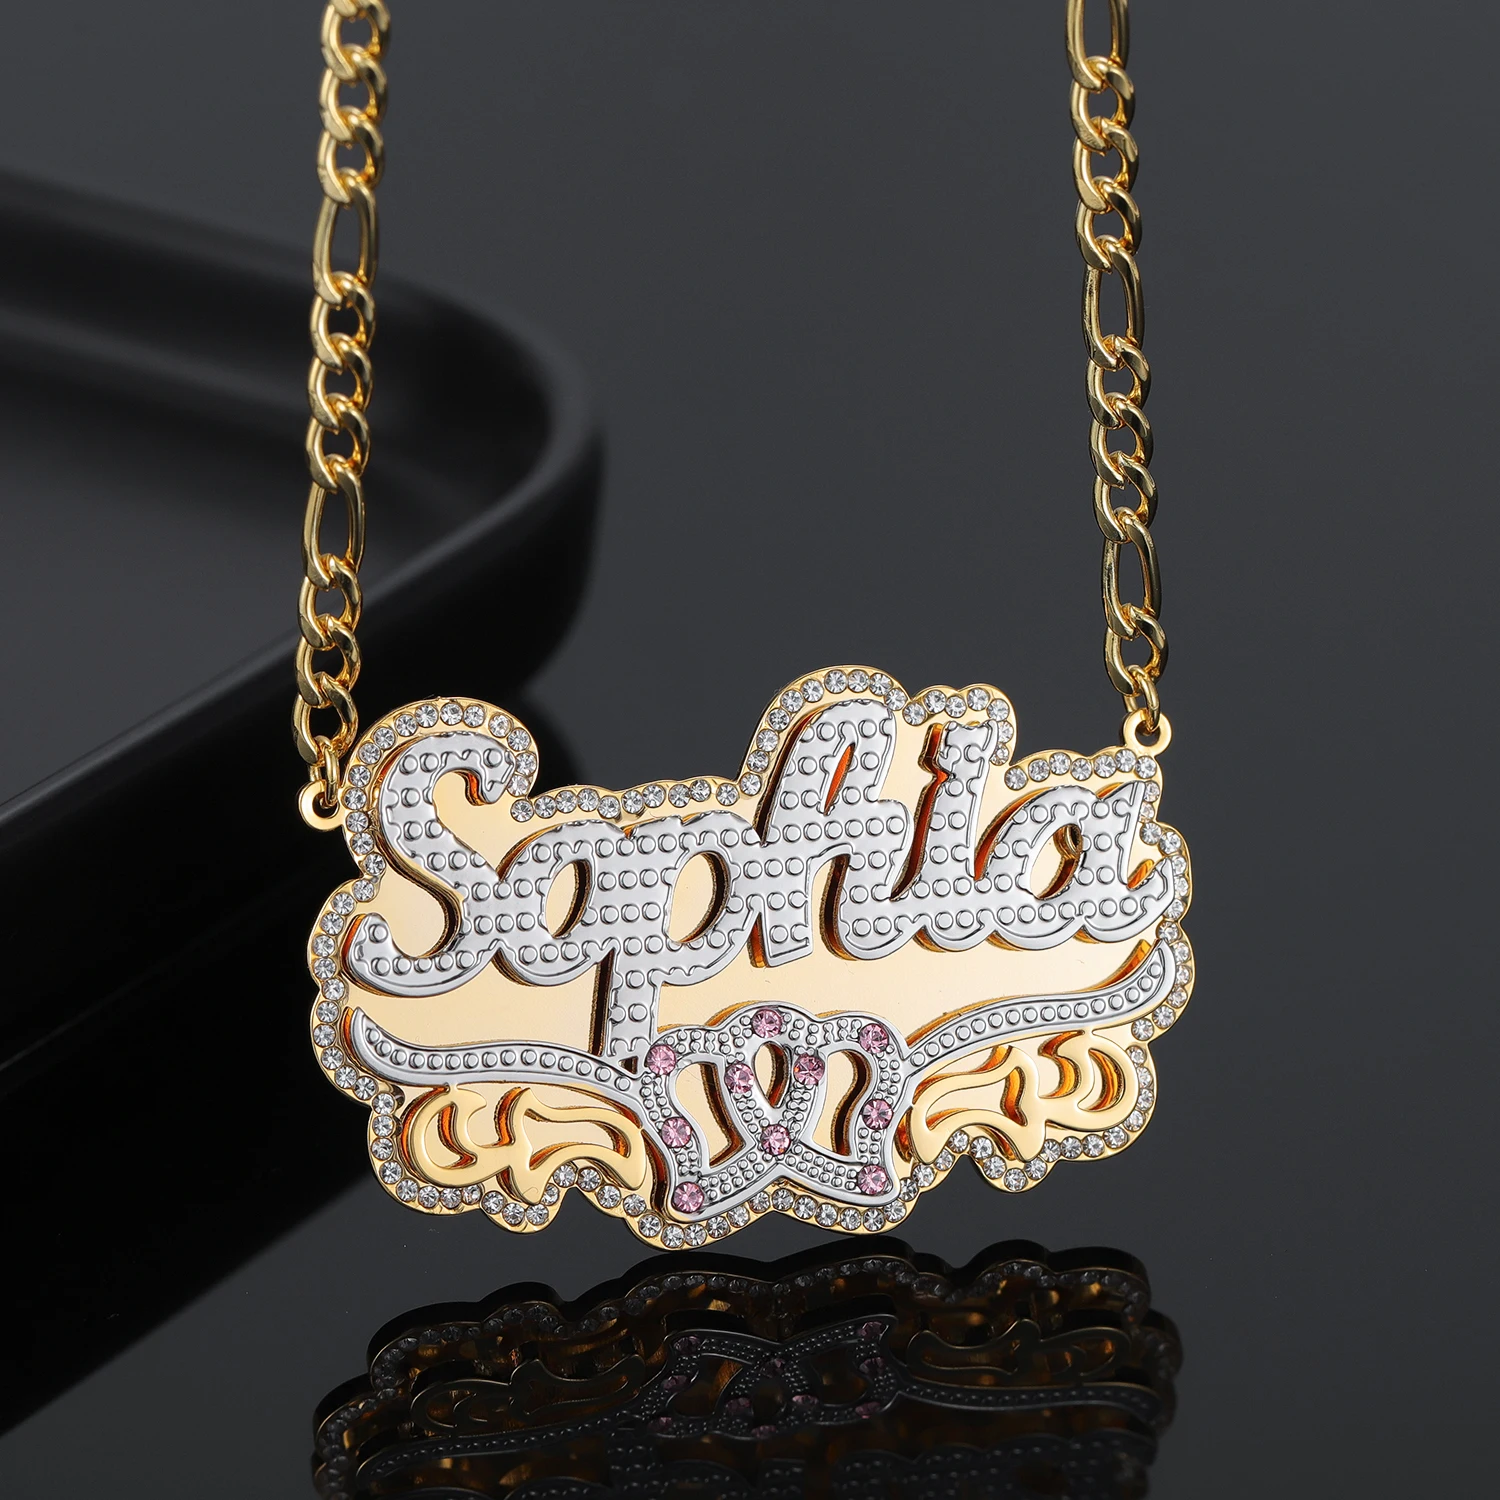 Dascusto Personalized Nameplate Name Necklace Custom 3D 18KGold Plated Double Diamond Choker Pendant Two-Tone Chain Mother's Day